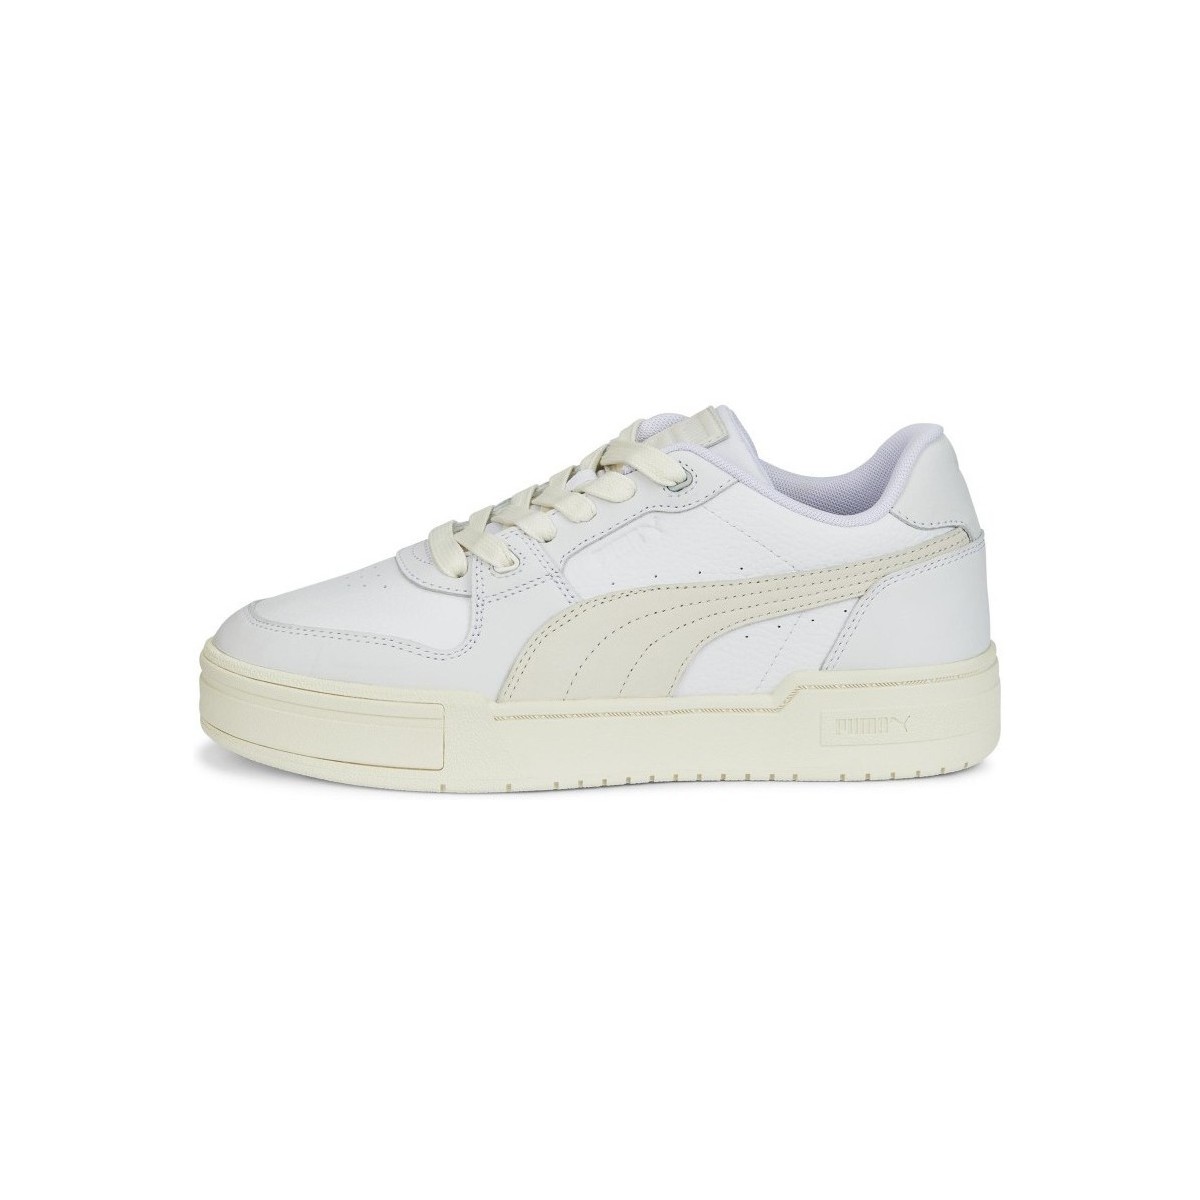 Chaussures Homme Baskets basses Puma Ca Pro Lux Blanc